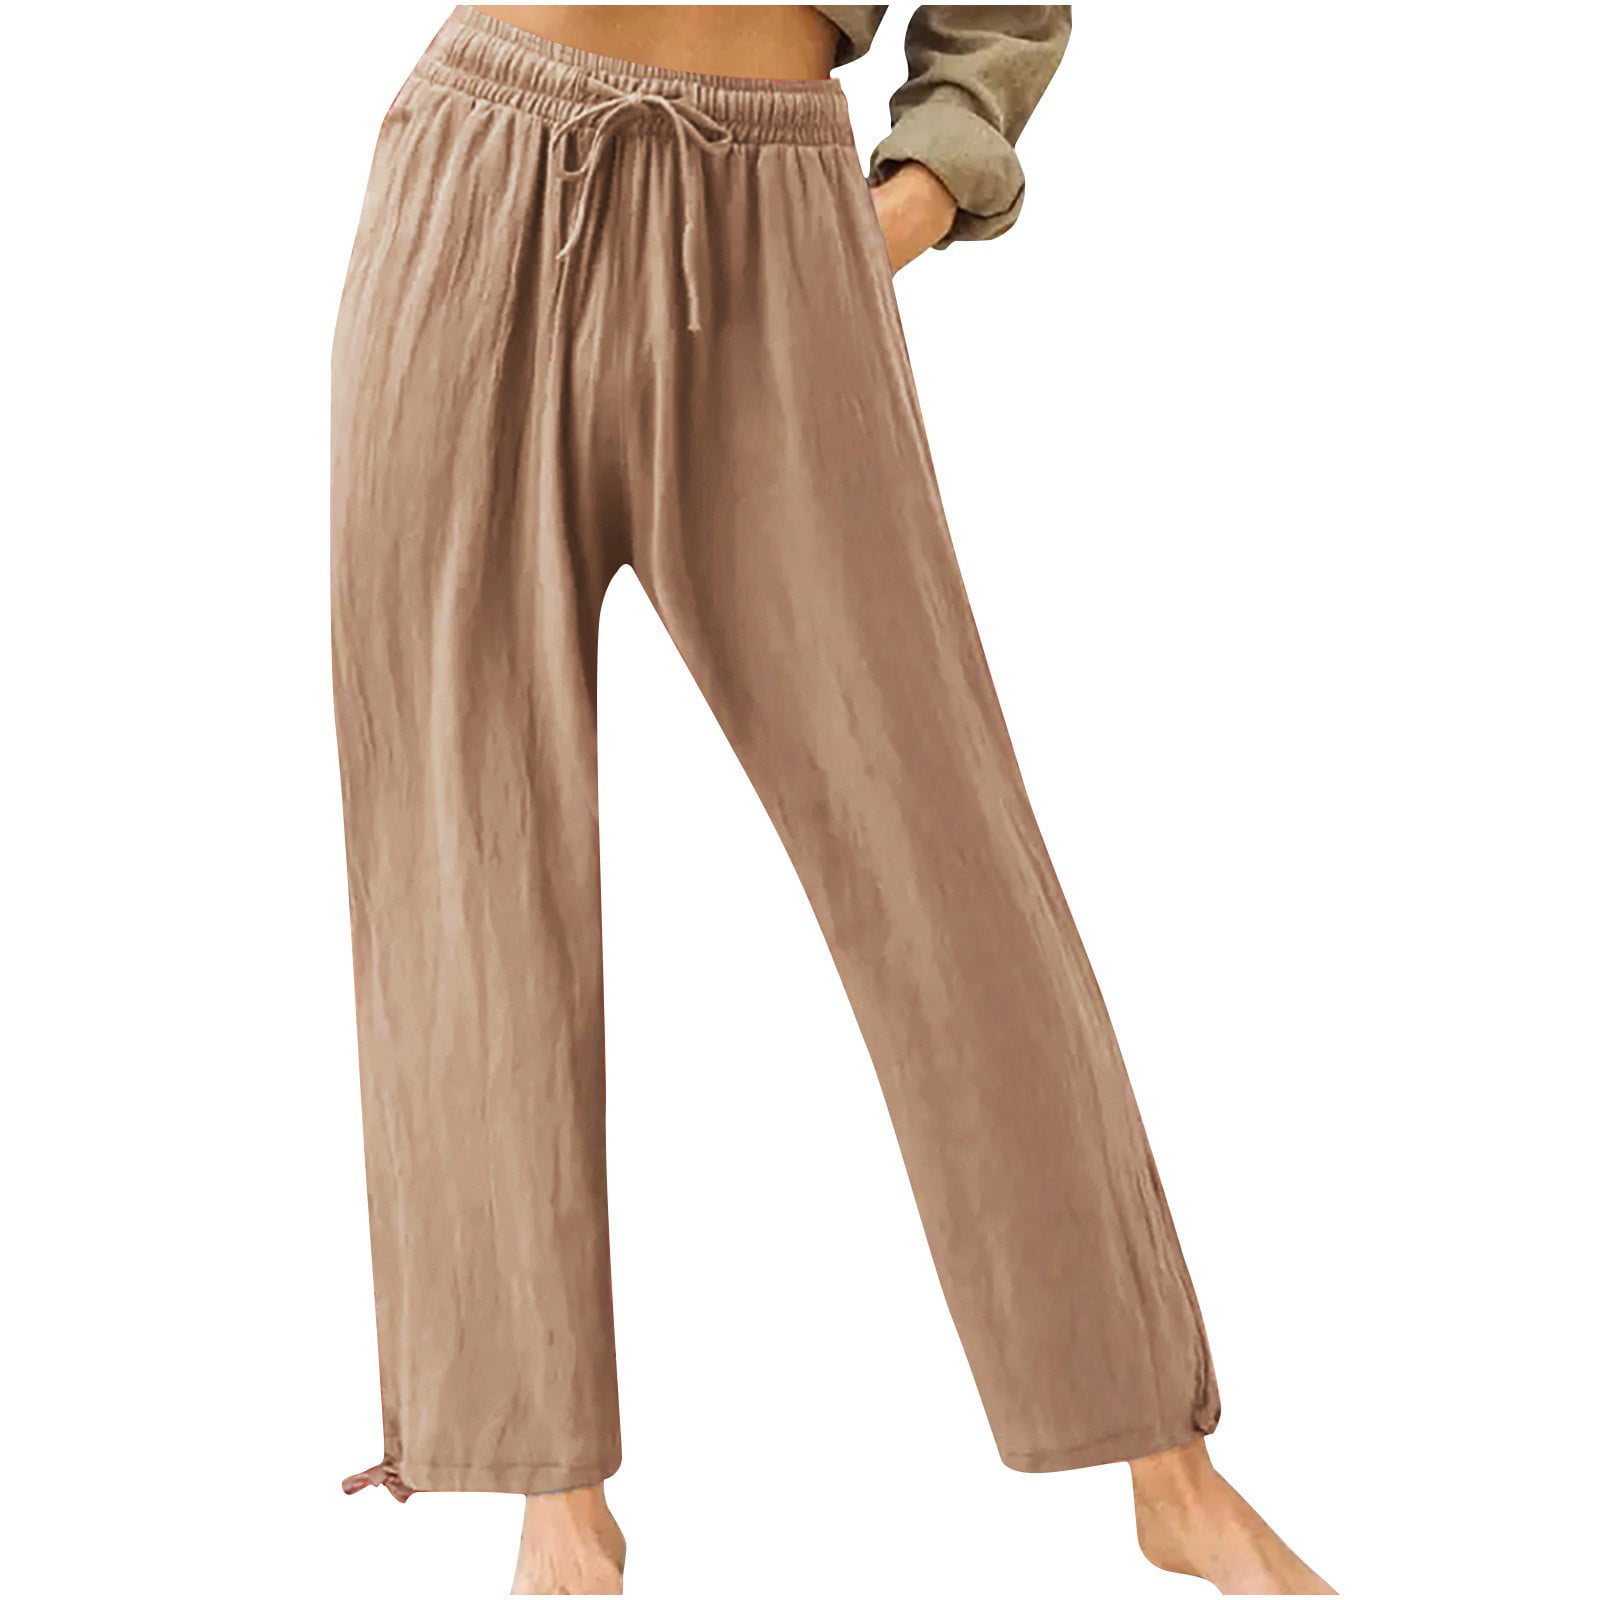 Plus Size Wide Leg Pants for Women Summer Casual Loose Fitting Lounge Pant  Slacks Trousers Drawstring Solid Color (Small, Green)